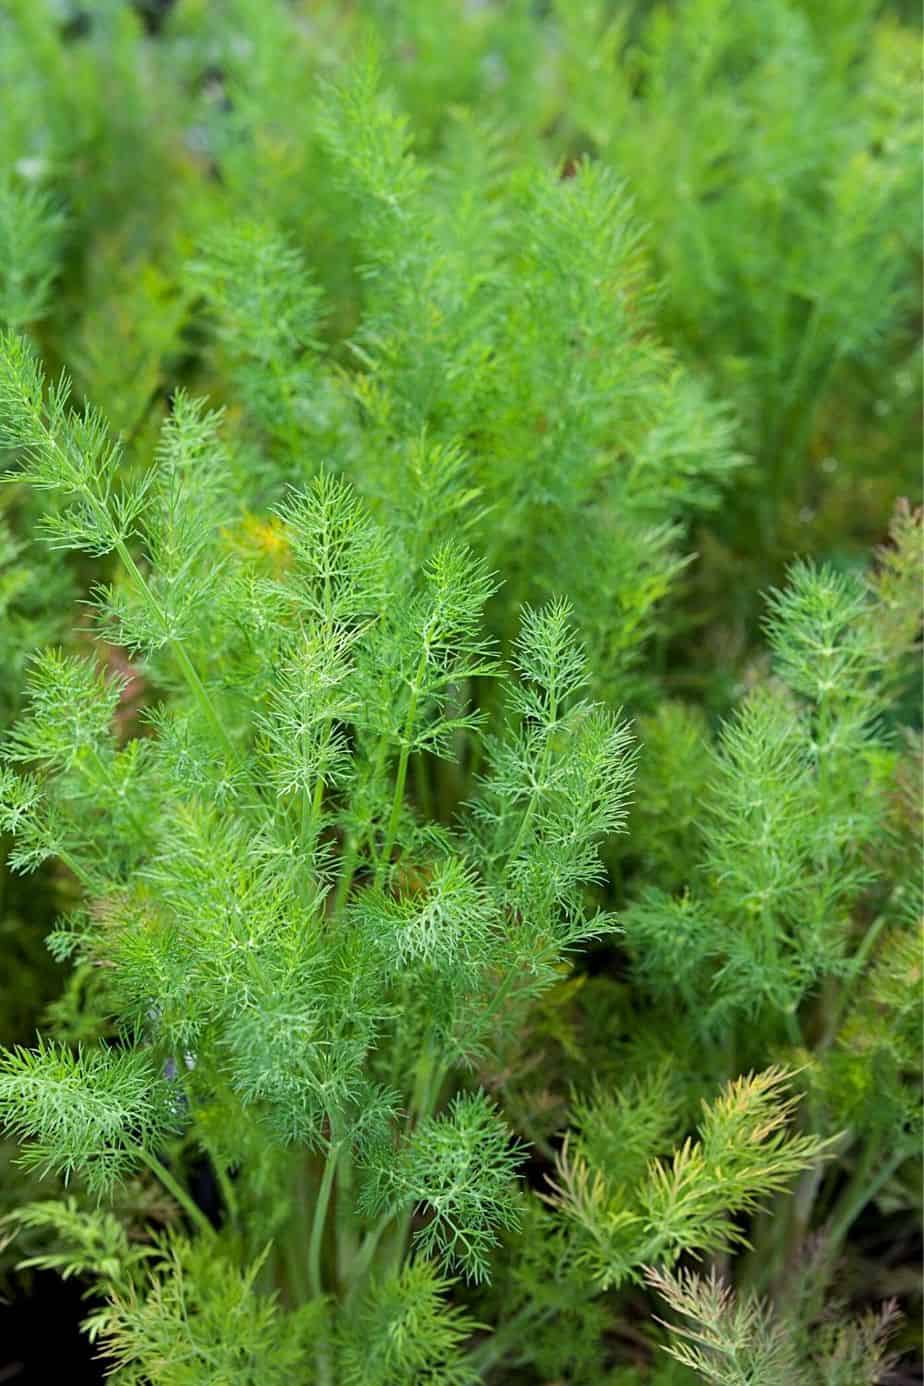 Dill is a great herb to add to your already colorful southwest facing garden